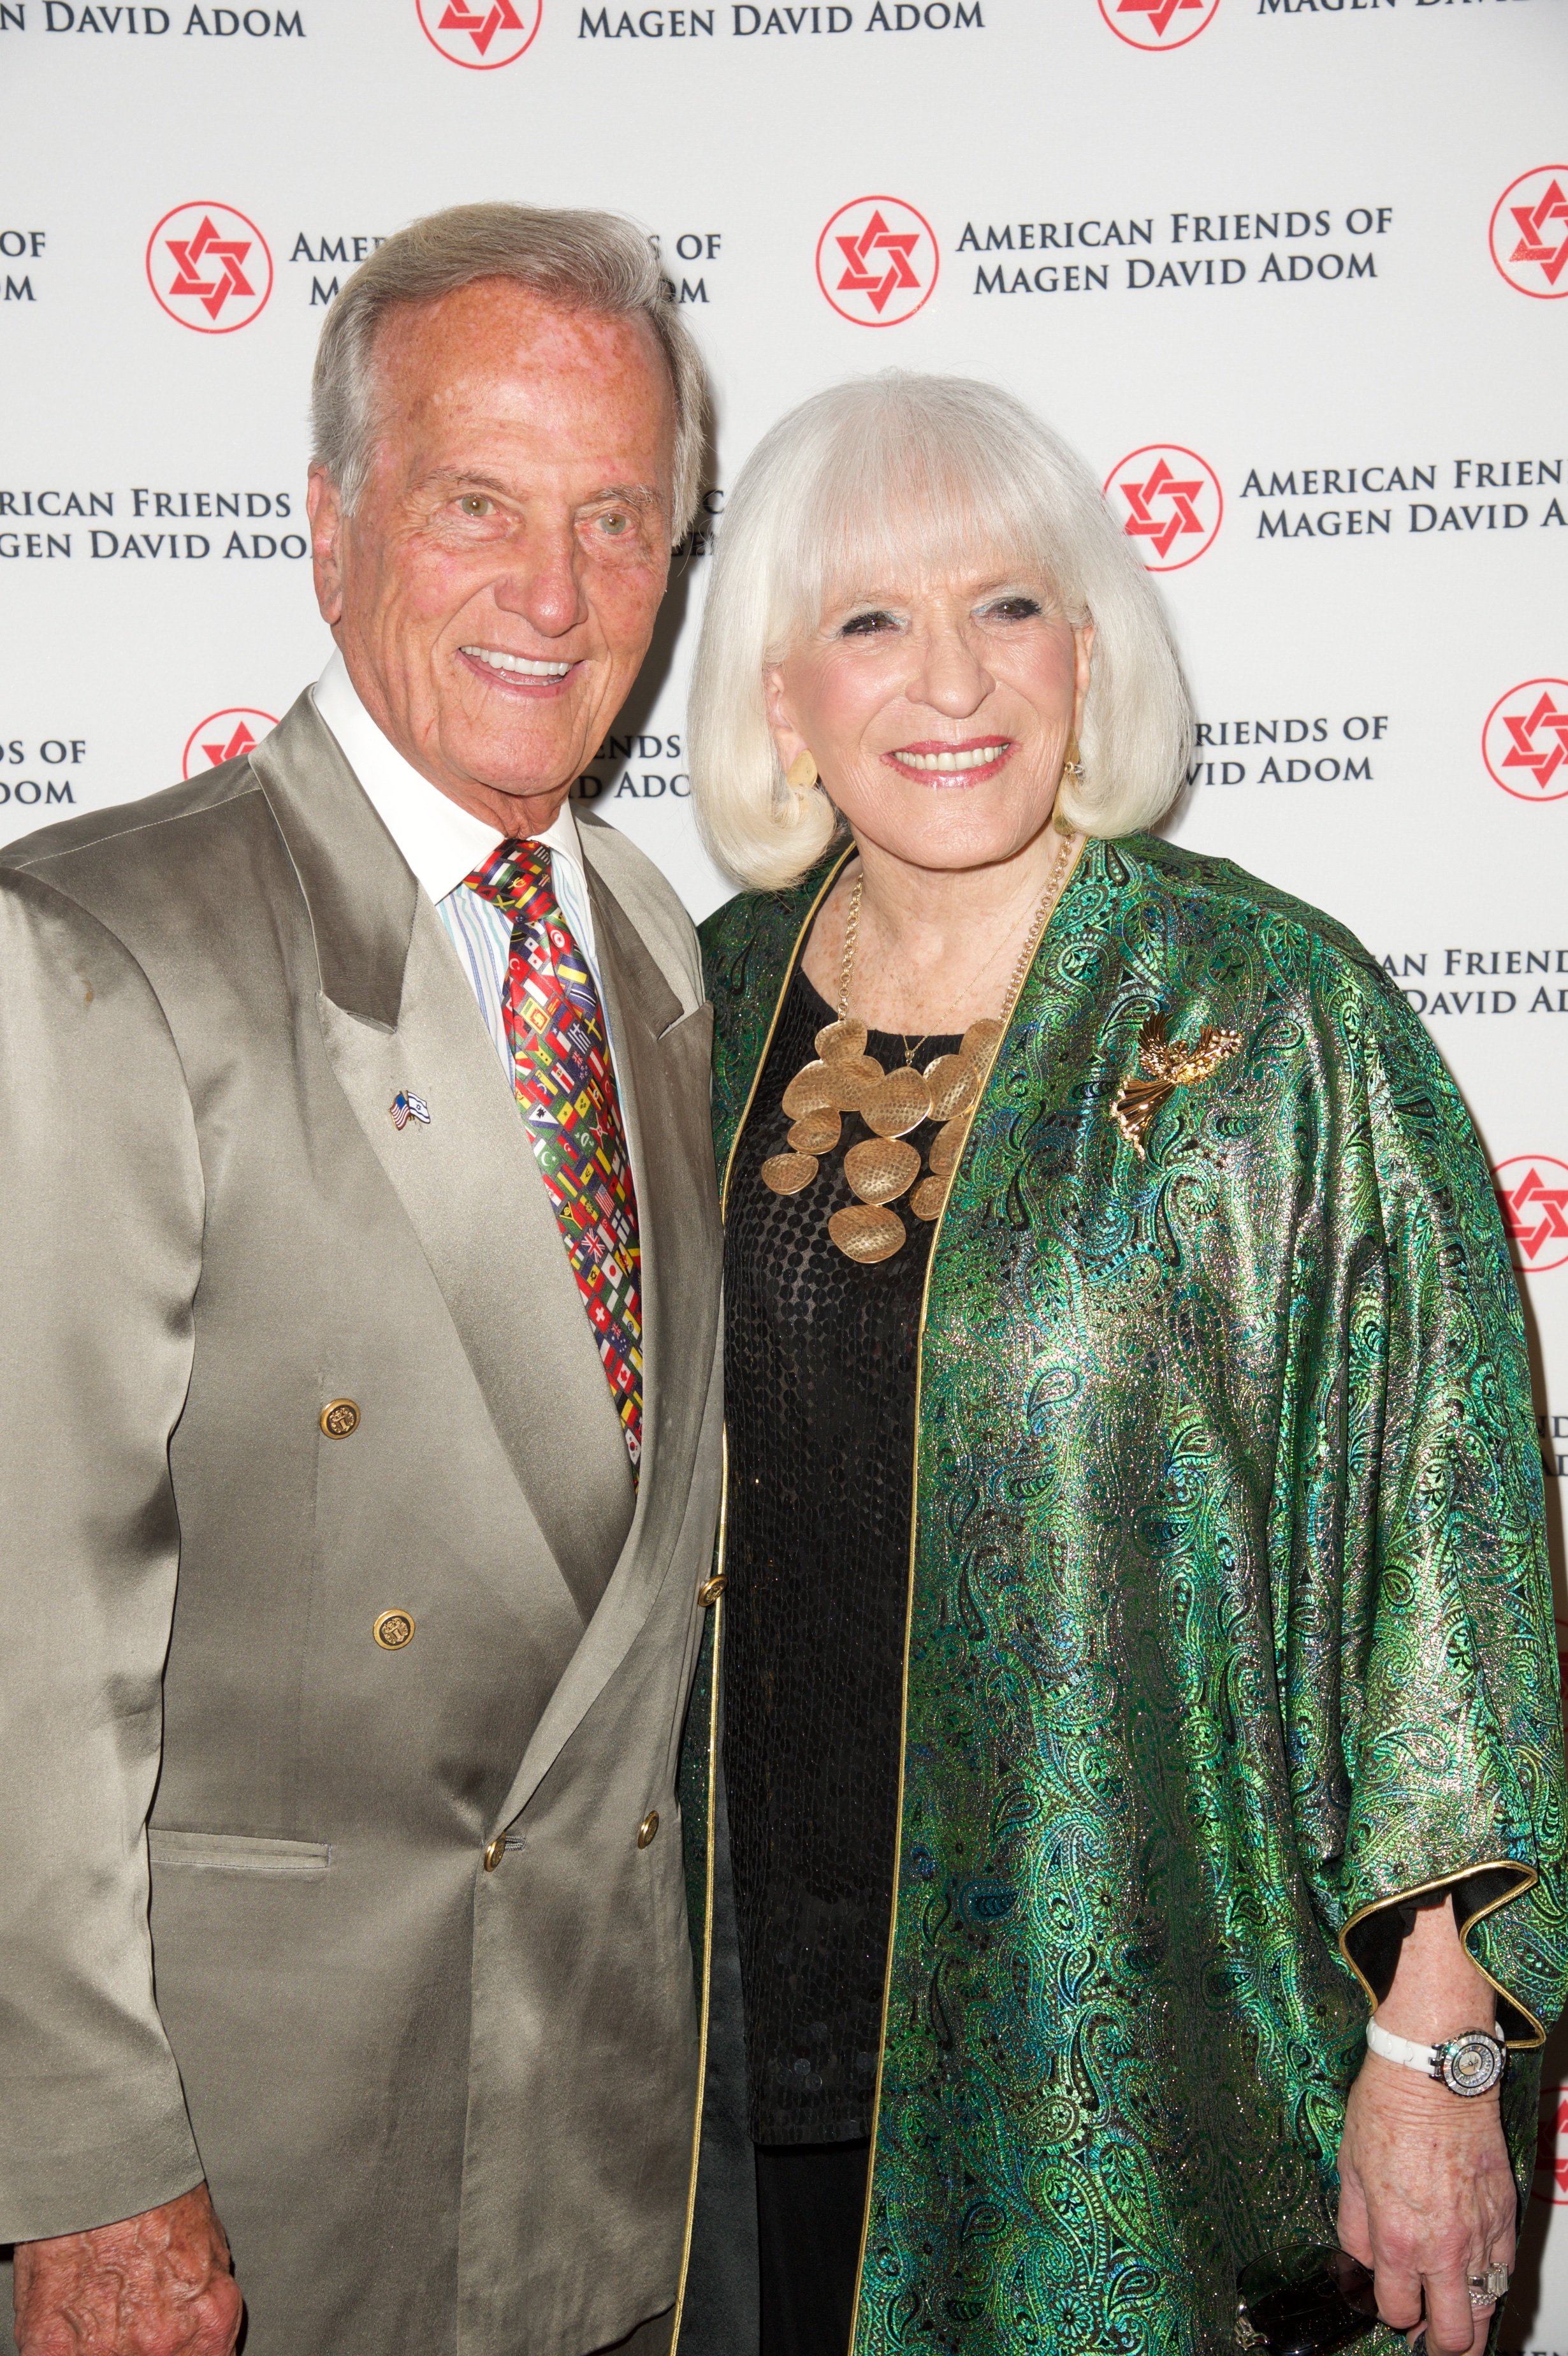 Pat Boone and wife Shirley Foley Boone attend American Friends Of Magen David Adom's Red Star Ball at The Beverly Hilton Hotel on October 23, 2014 in Beverly Hills, California. | Source: Getty Images